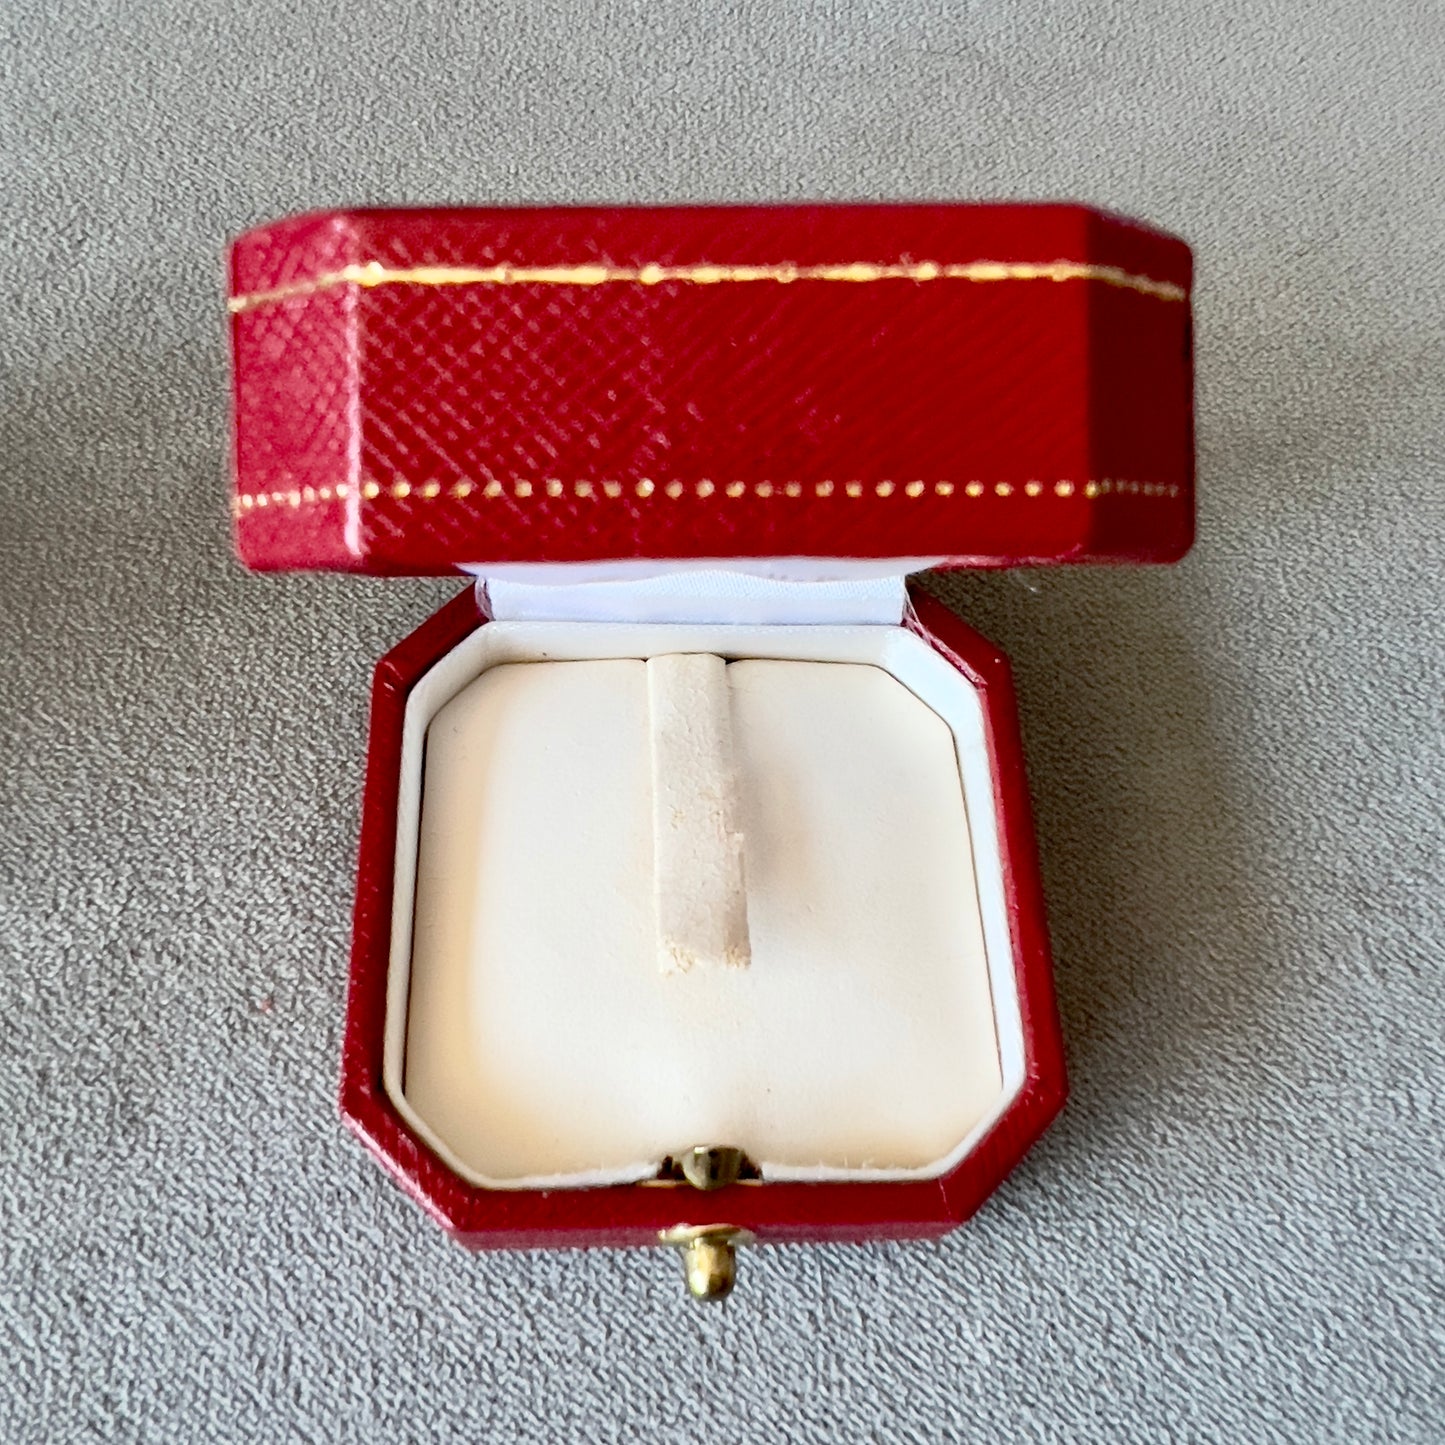 CARTIER Ring Box + Outer Box 2.60x2.10x1.30 inches